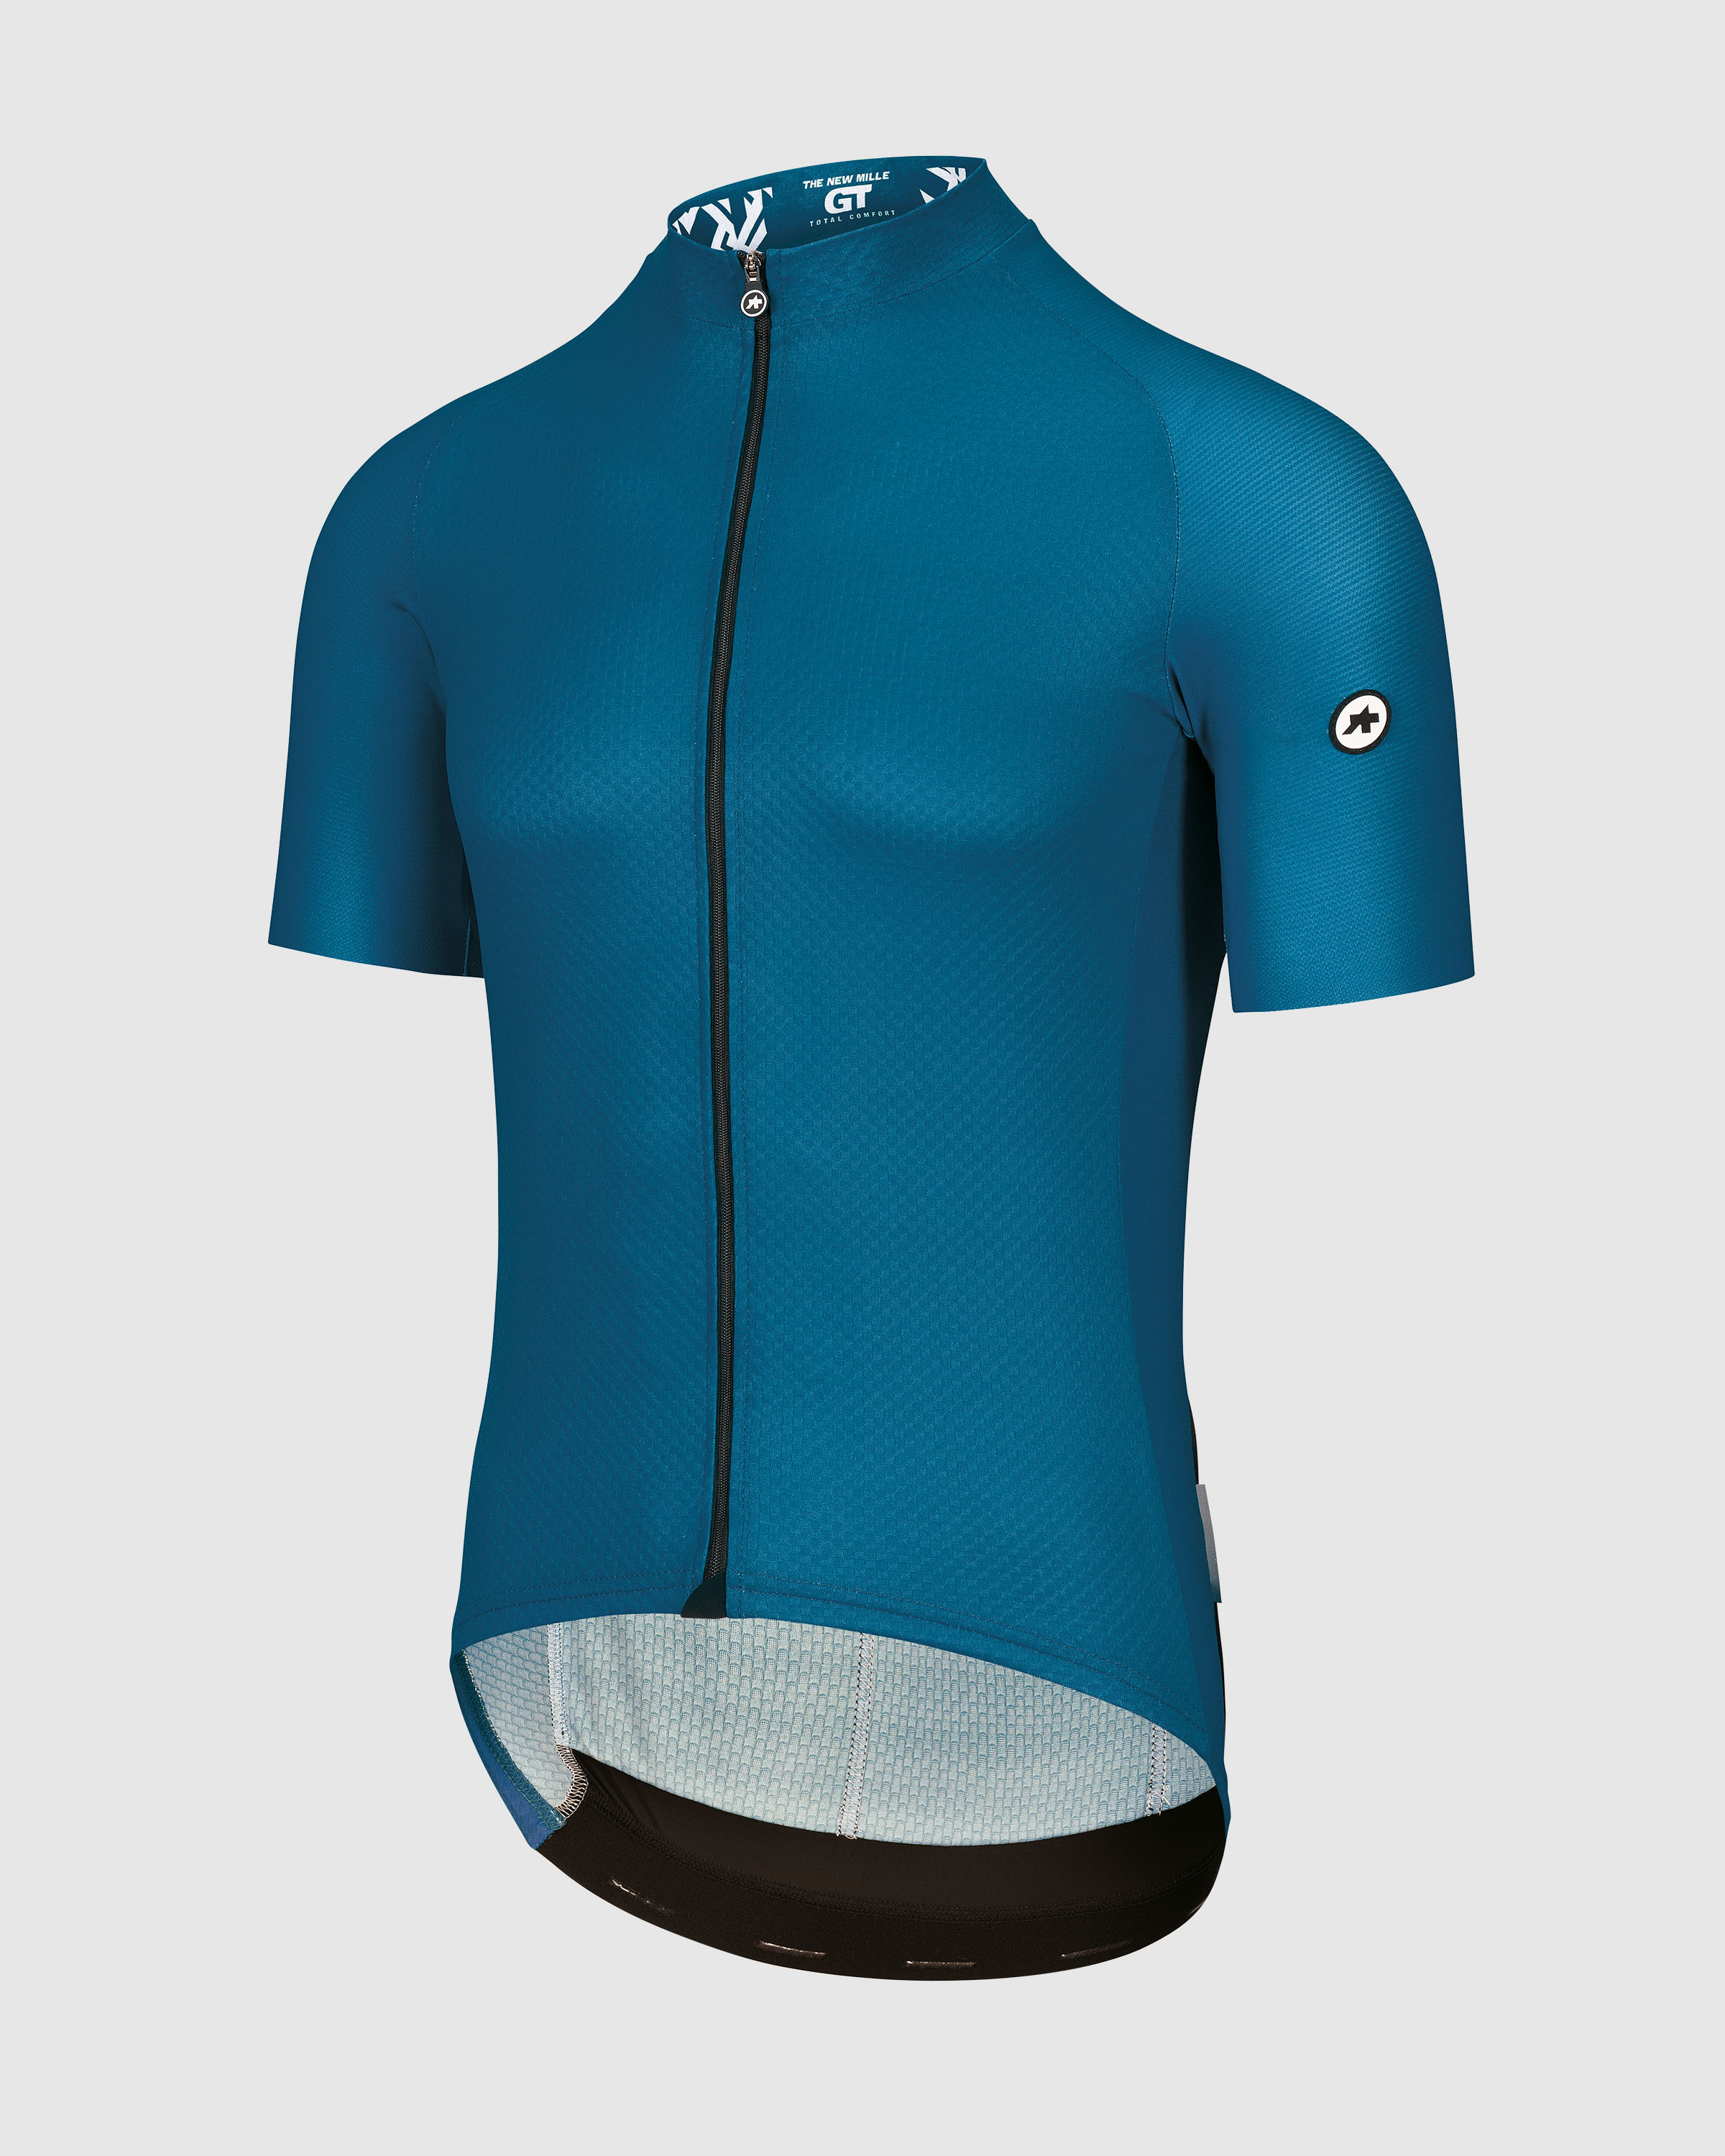 MILLE GT Jersey c2 - ASSOS Of Switzerland - Official Outlet